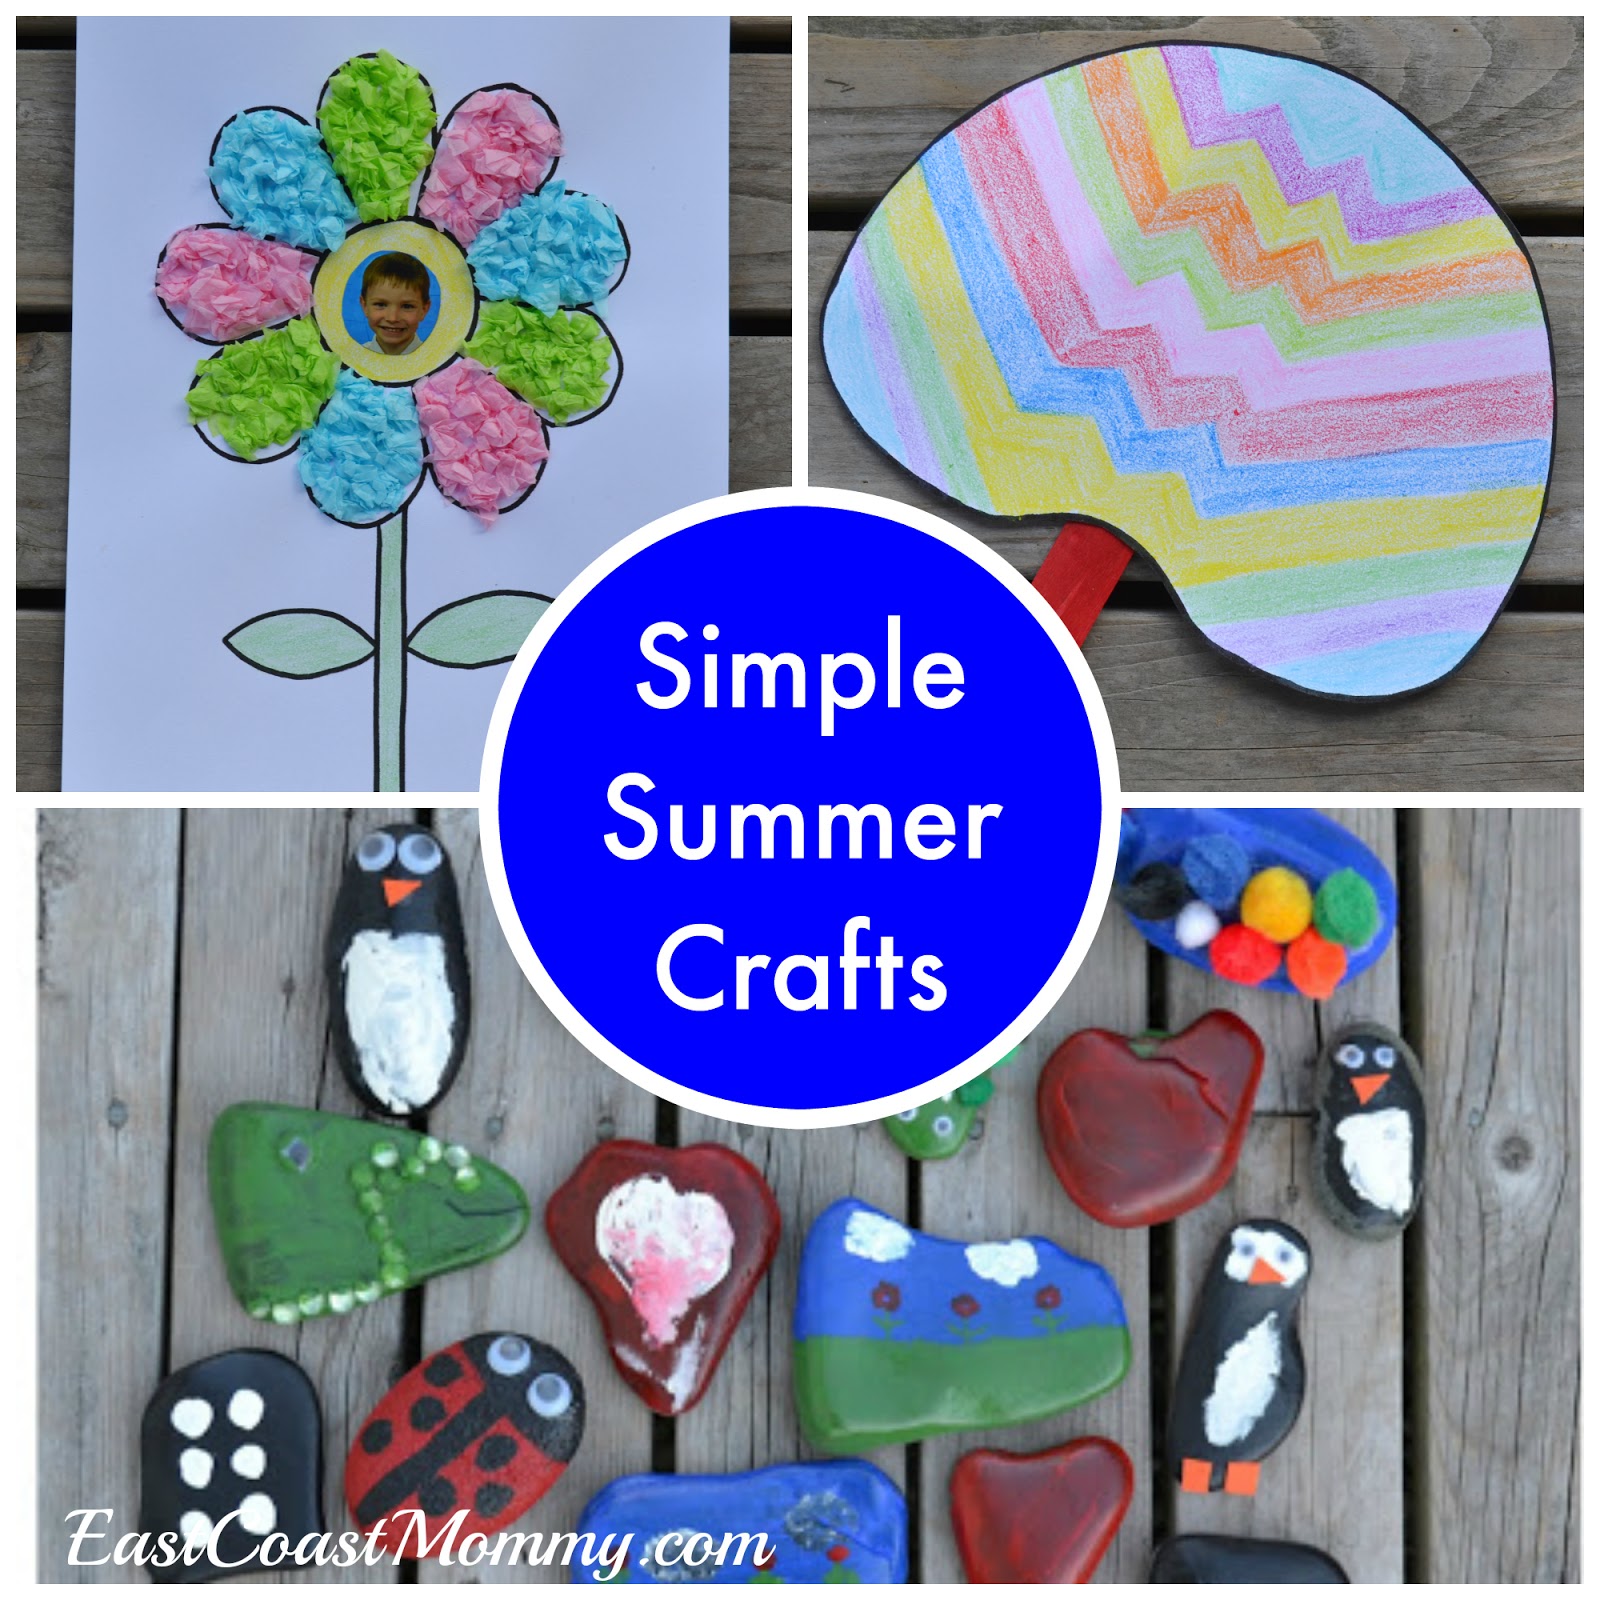 East Coast Mommy Simple Summer Crafts {with free printable templates}